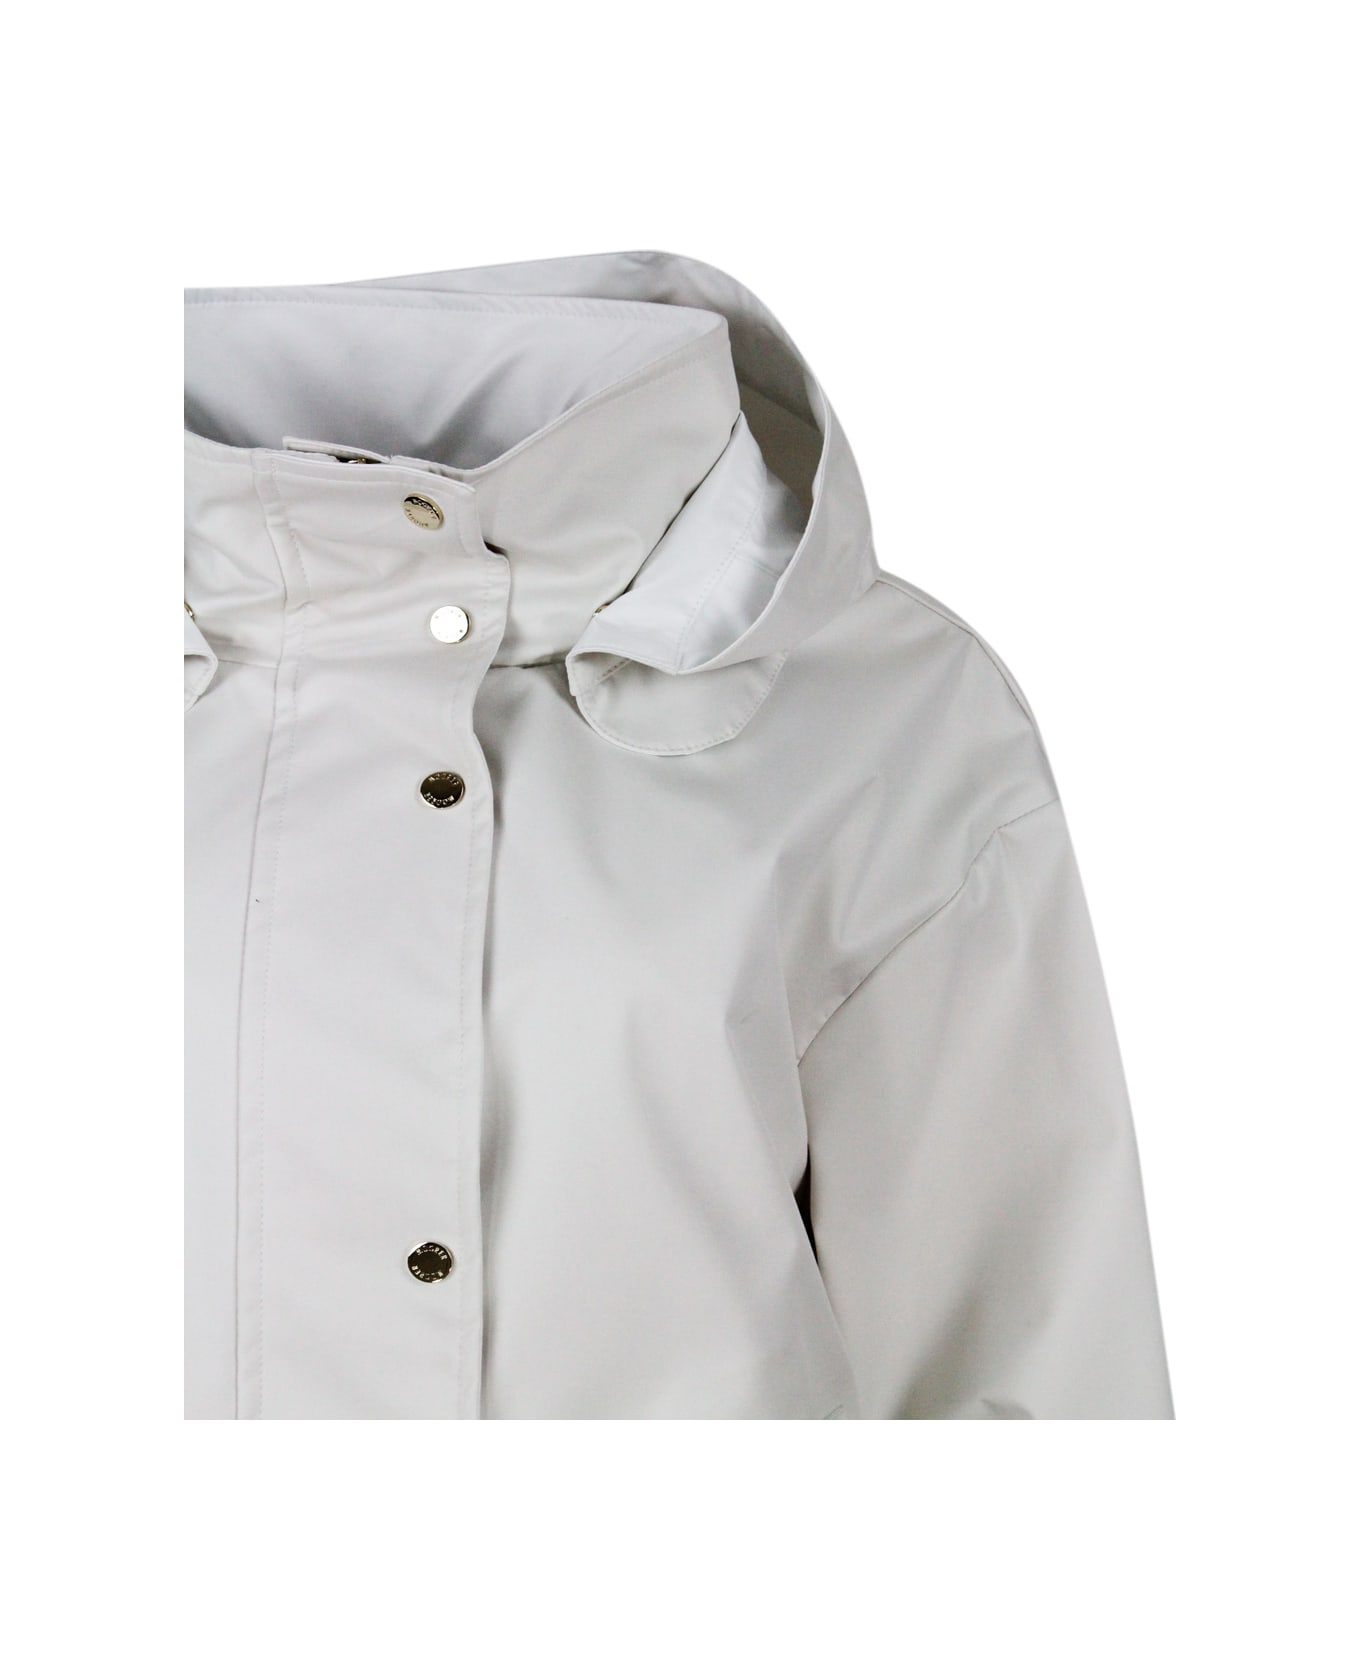 Moorer Jacket In Fine Waterproof Material 2 Umbrellas With Detachable Hood, Side Zips On The Sides And Internal Drawstring. Zip And Snap Button Closure - Avorio light bianco